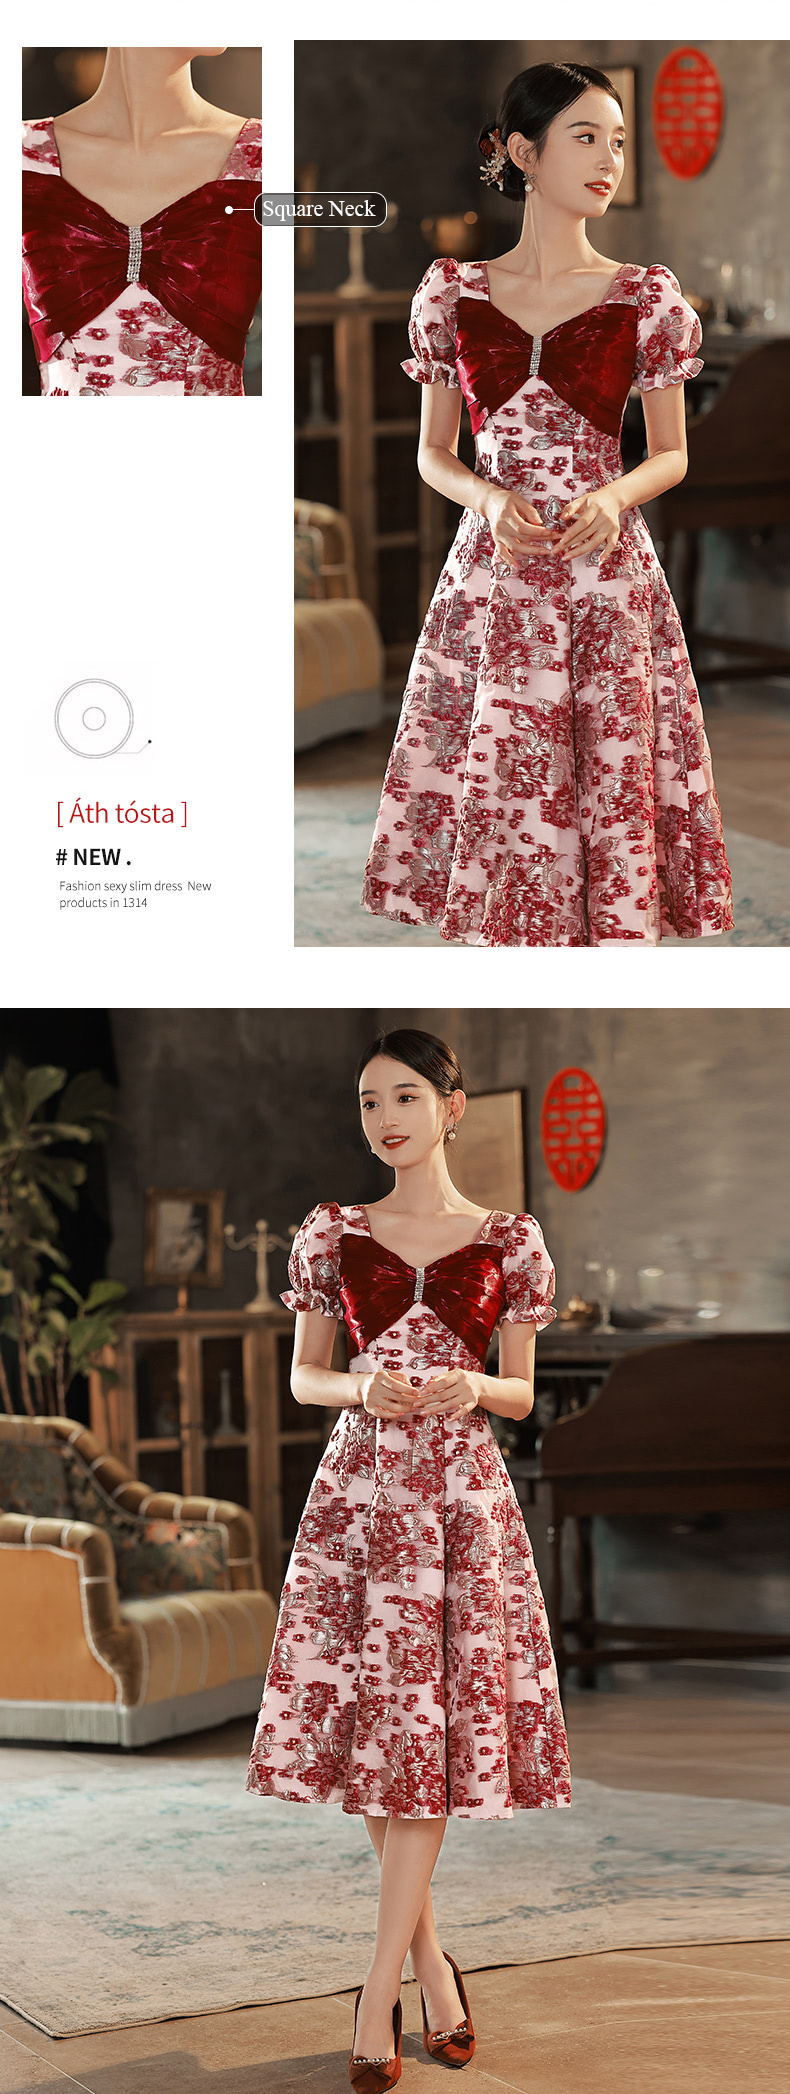 Burgundy-Red-Prom-Midi-Dress-Floral-Evening-Party-Ball-Gown12.jpg